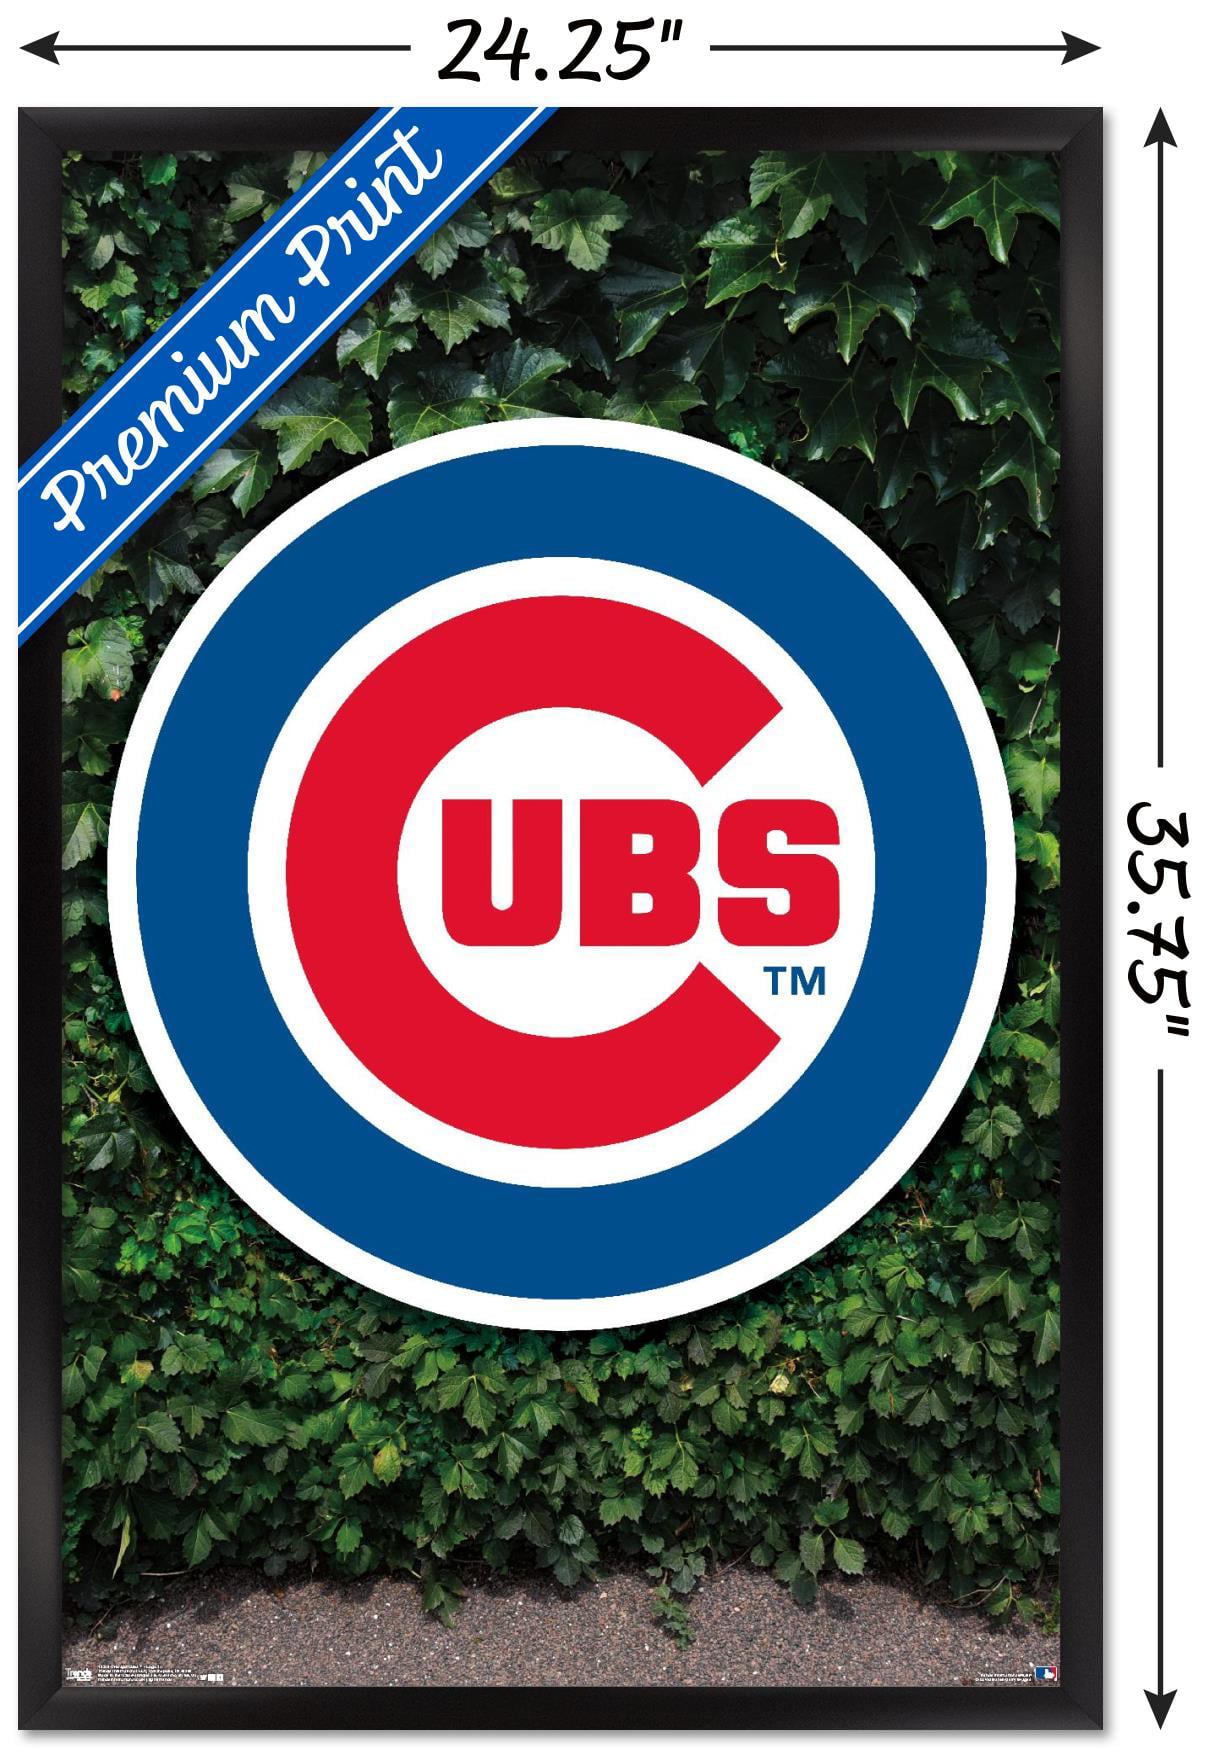 Chicago Cubs MLB Wrigley Field 1908 World Series Go Cubs Go baseball  blue text trademark png  PNGWing